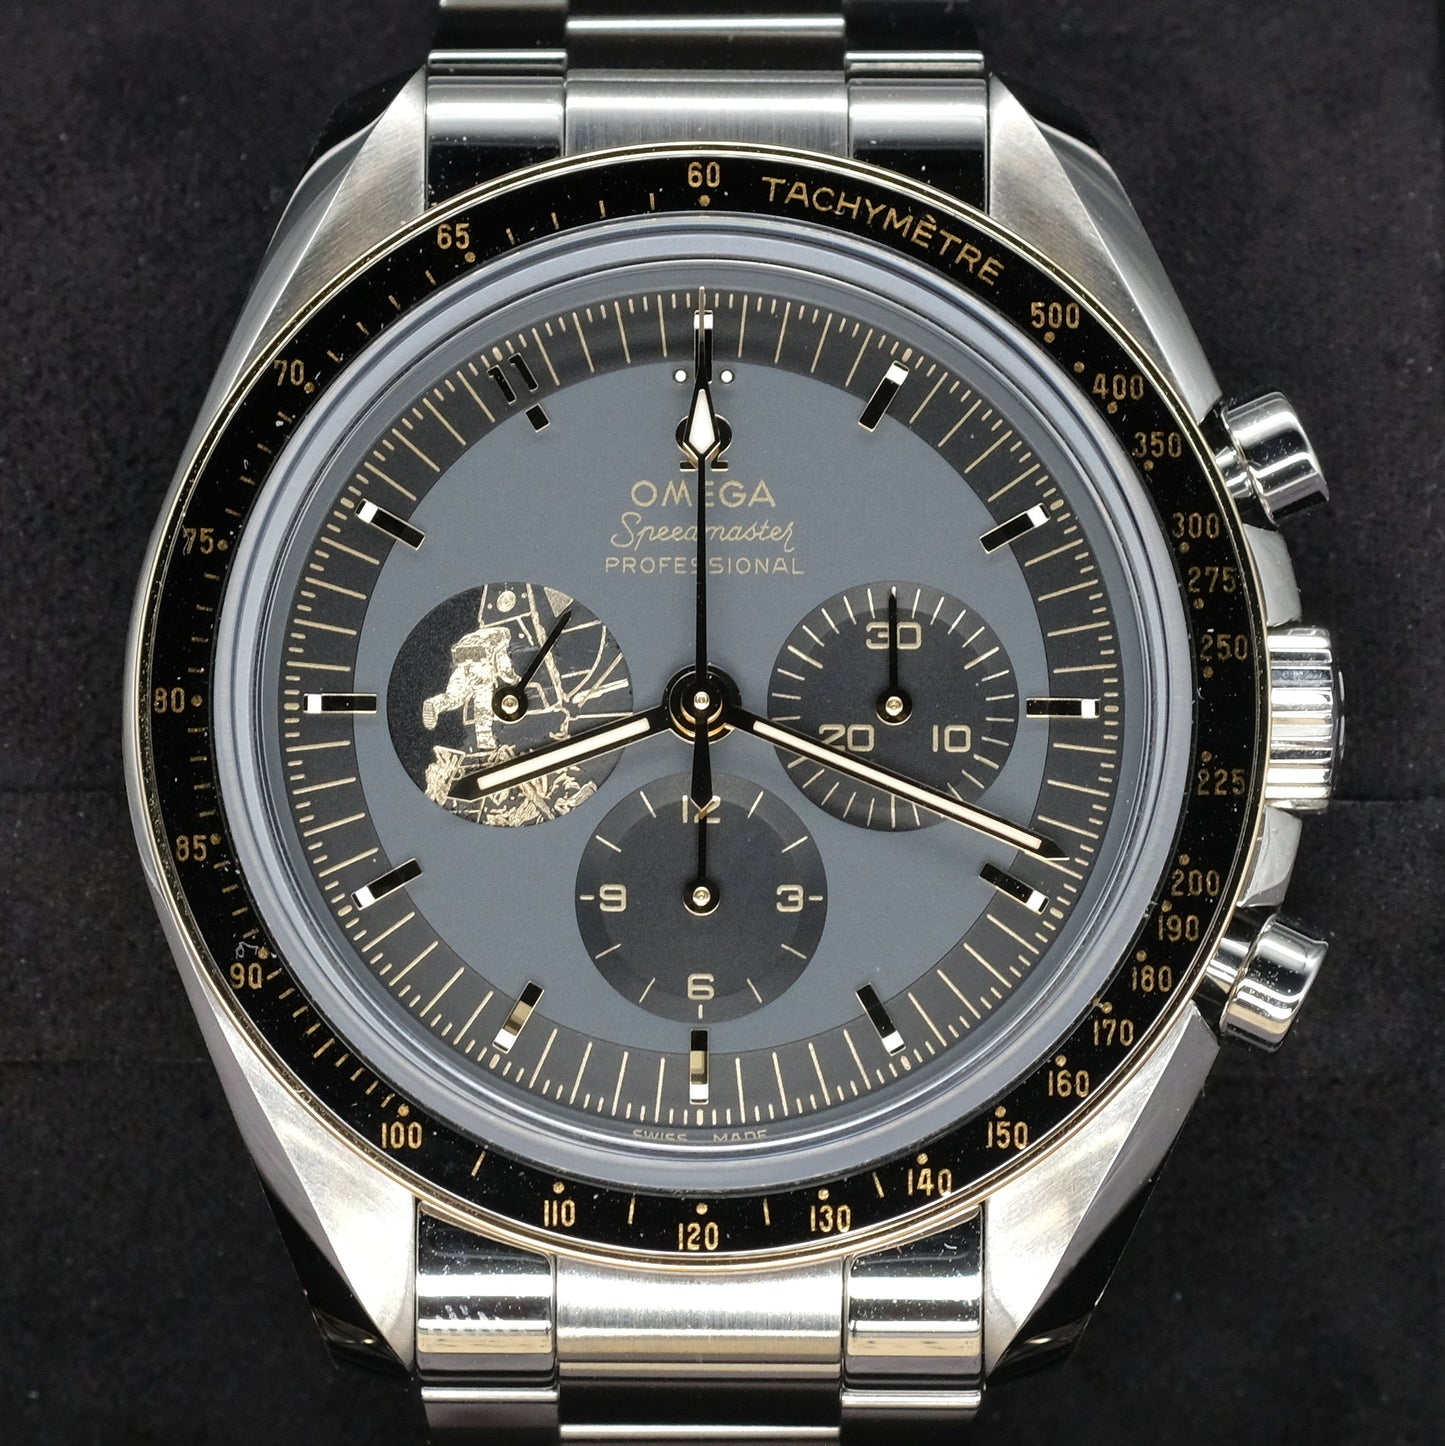 [Pre-Owned Watch] Omega Speedmaster Moonwatch Anniversary Limited Series Apollo 11 42mm 310.20.42.50.01.001 (Limited Edition of 6,969 Pieces)